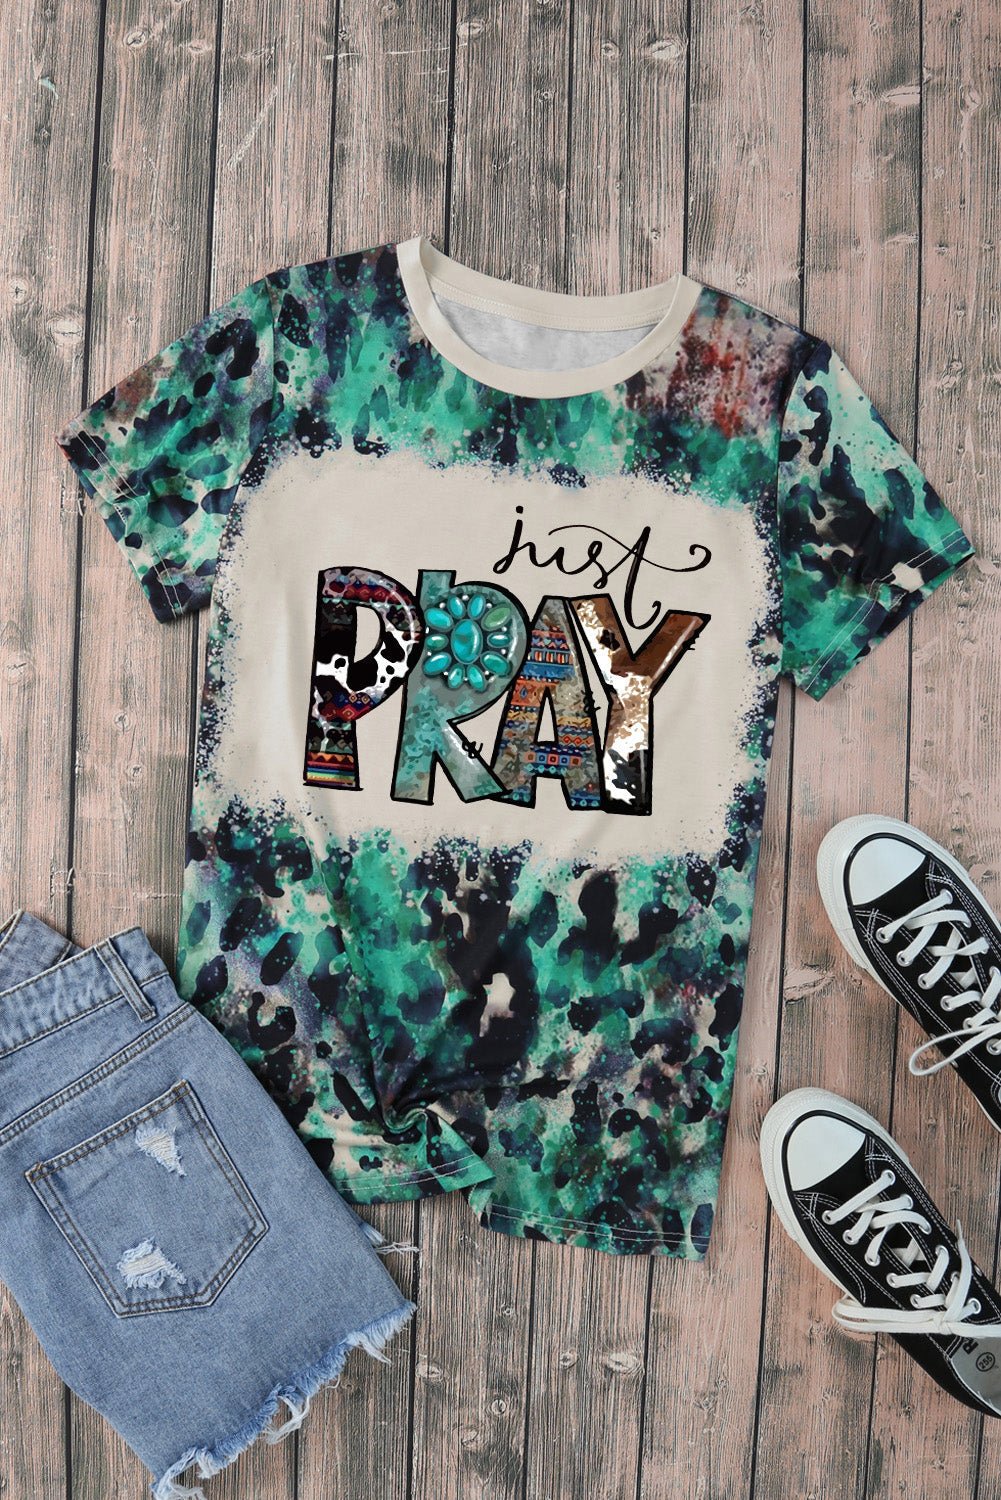 Just Pray Graphic Tee Shirt - Express Your Faith with Romantic Style - Feel the Love and Warmth of True Faith - Guy Christopher